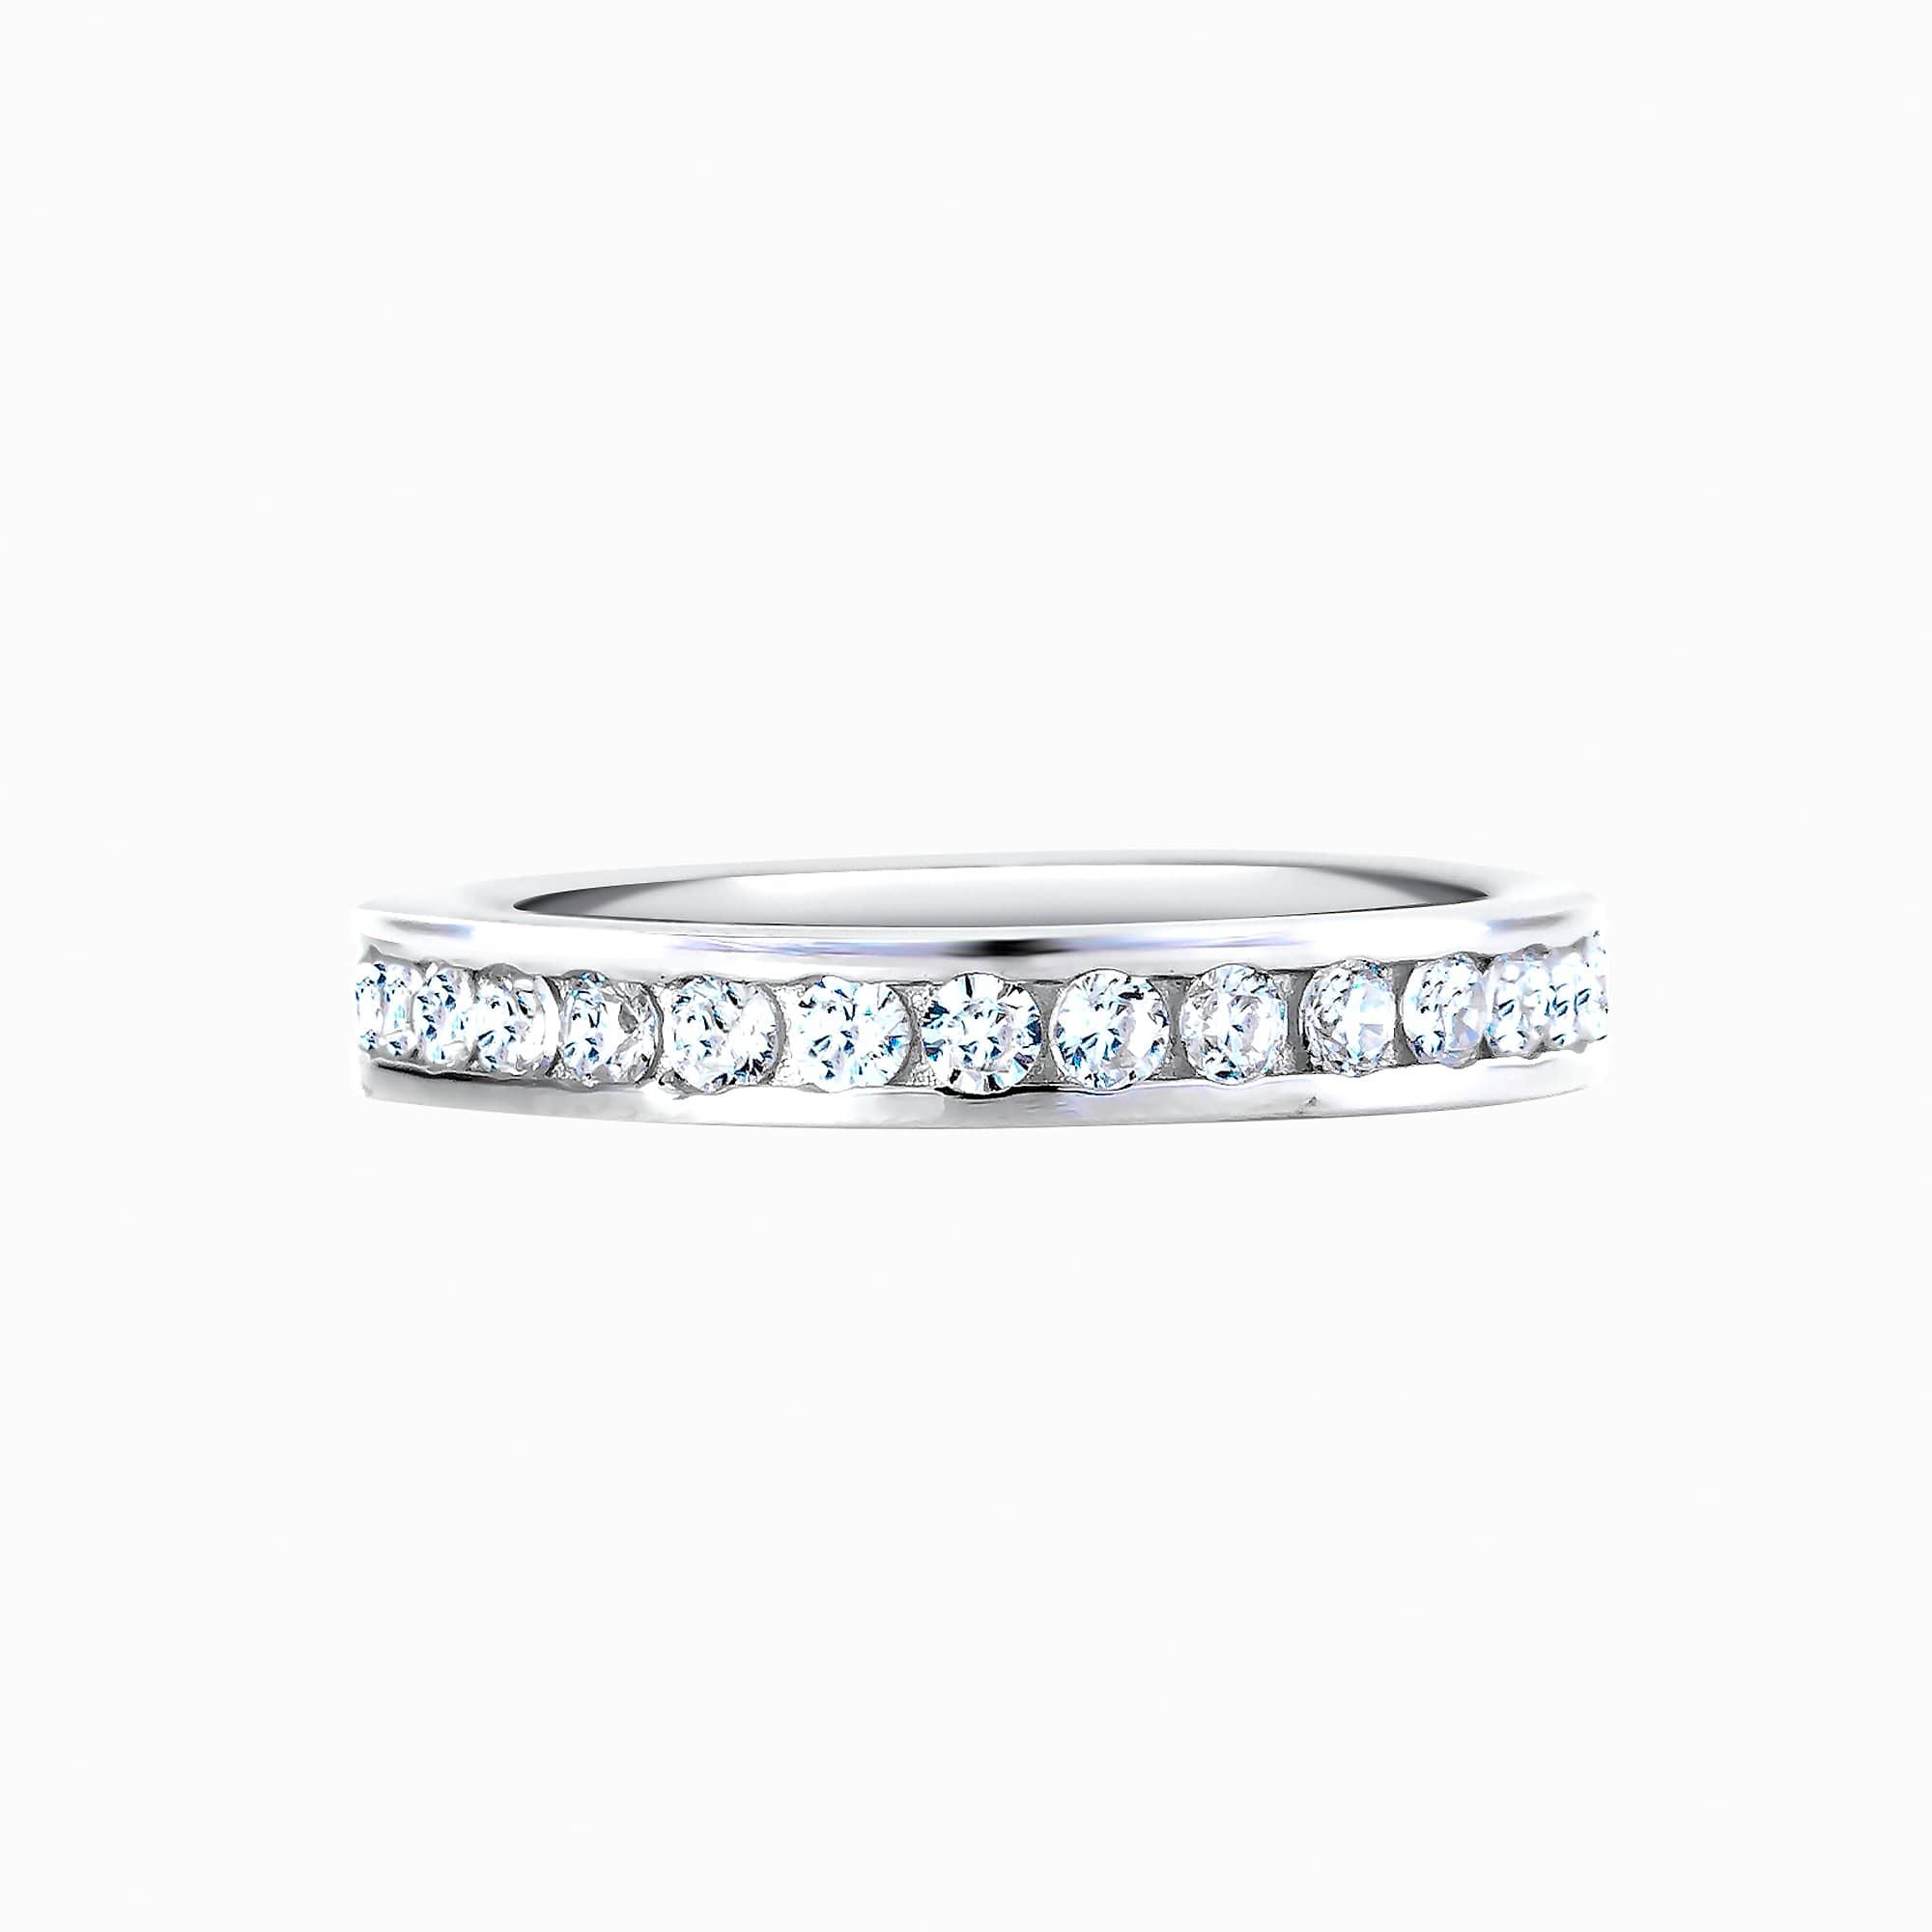 Lynora Jewellery Ring Eternity Channel Ring Sterling Silver